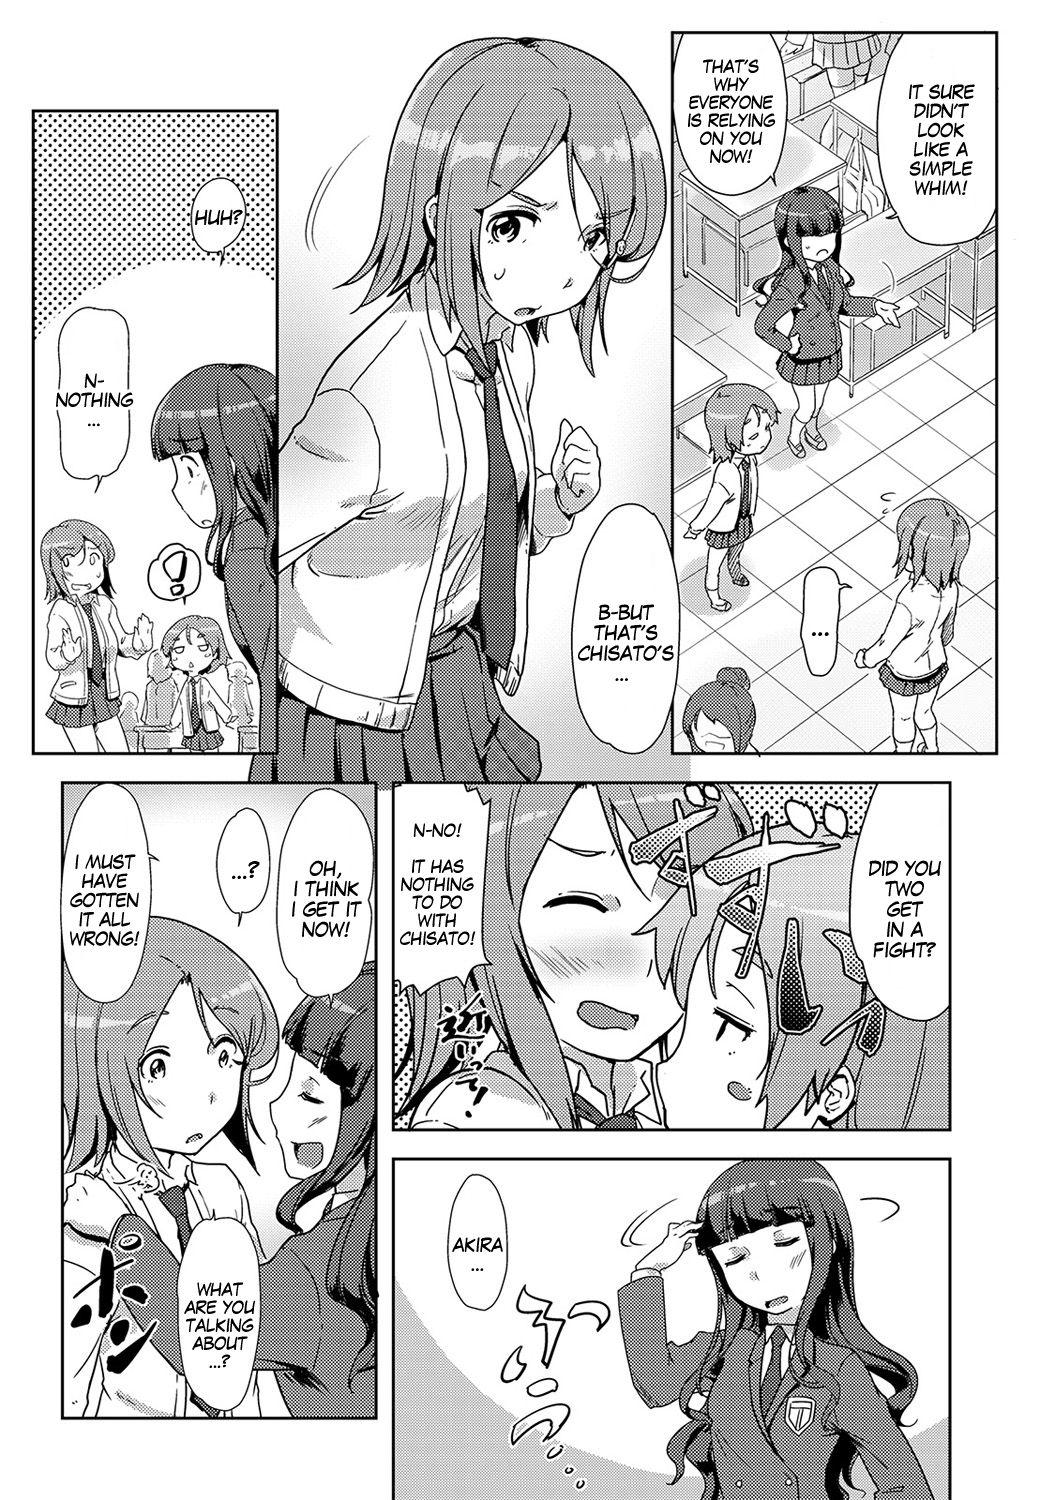 Couples Ecchi Shitara Irekawacchatta!? | We Switched Our Bodies After Having Sex!? Ch. 5 Negra - Page 6